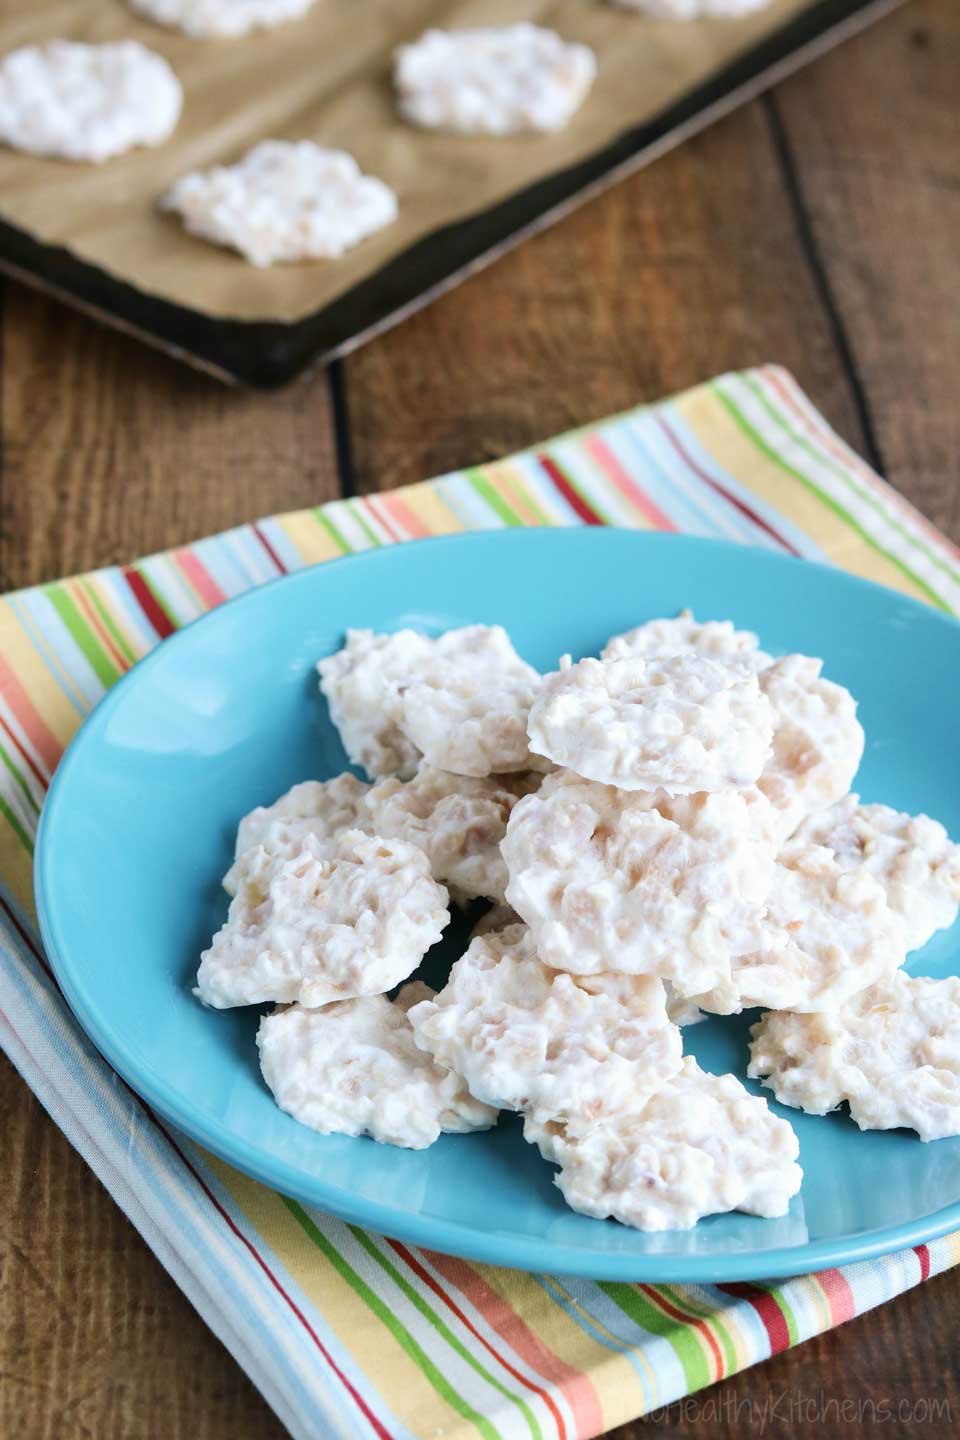 This super-easy Frozen Yogurt Homemade Dog Treat Recipe has just 2 simple ingredients dogs love – a total snap to make! Bonus: it’s the perfect way to use up leftover chicken! | www.TwoHealthyKitchens.com